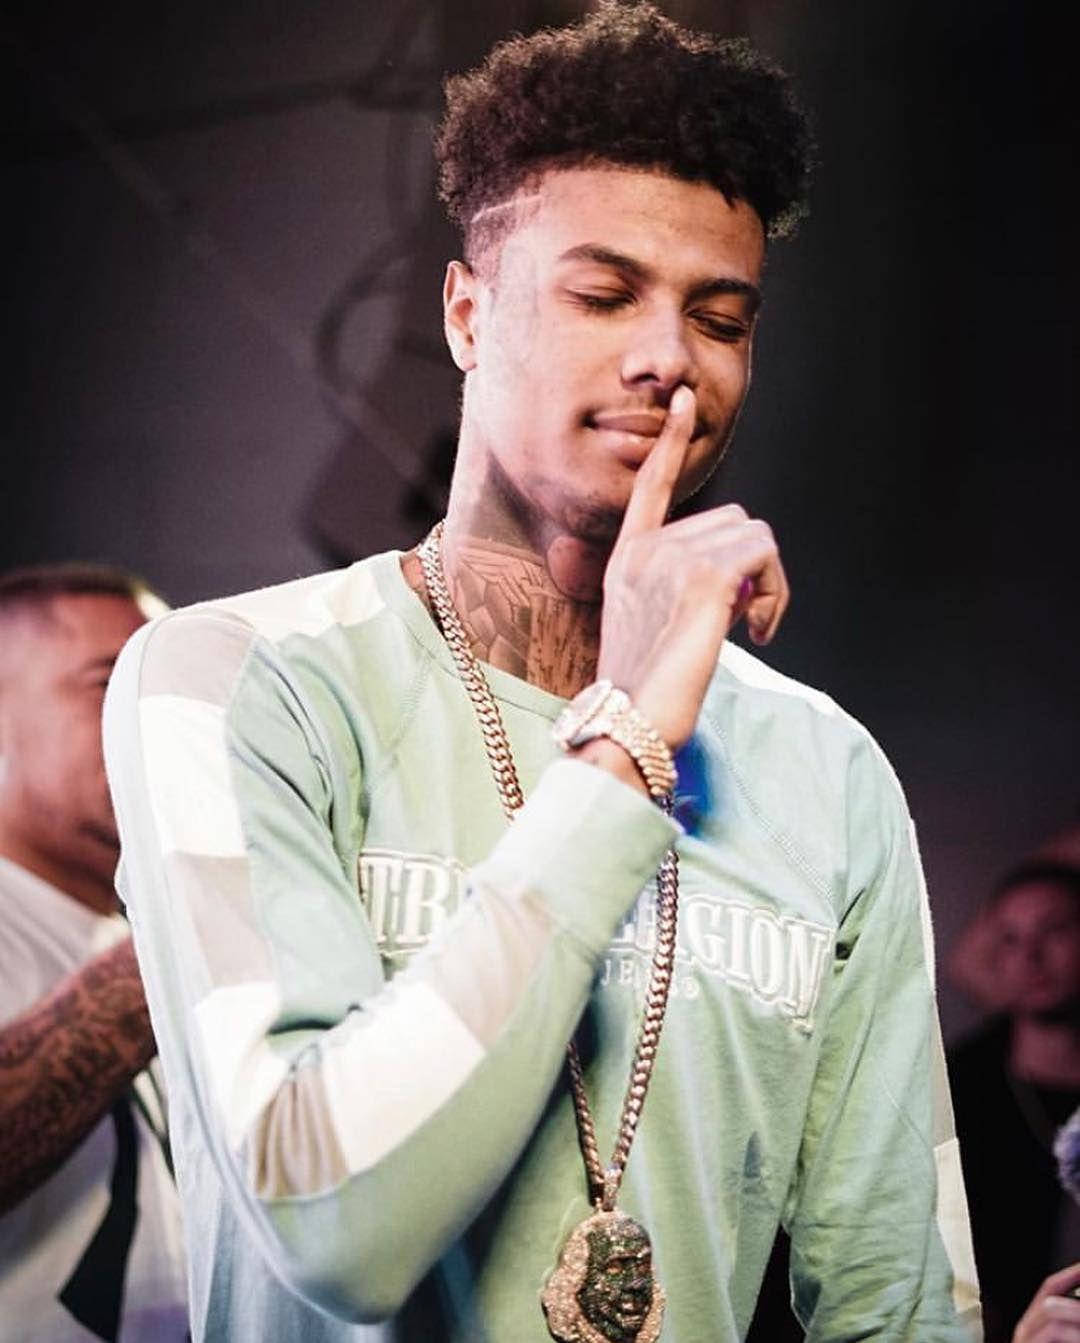 blueface ya aight  Rapper wallpaper iphone Iconic wallpaper Cute rappers